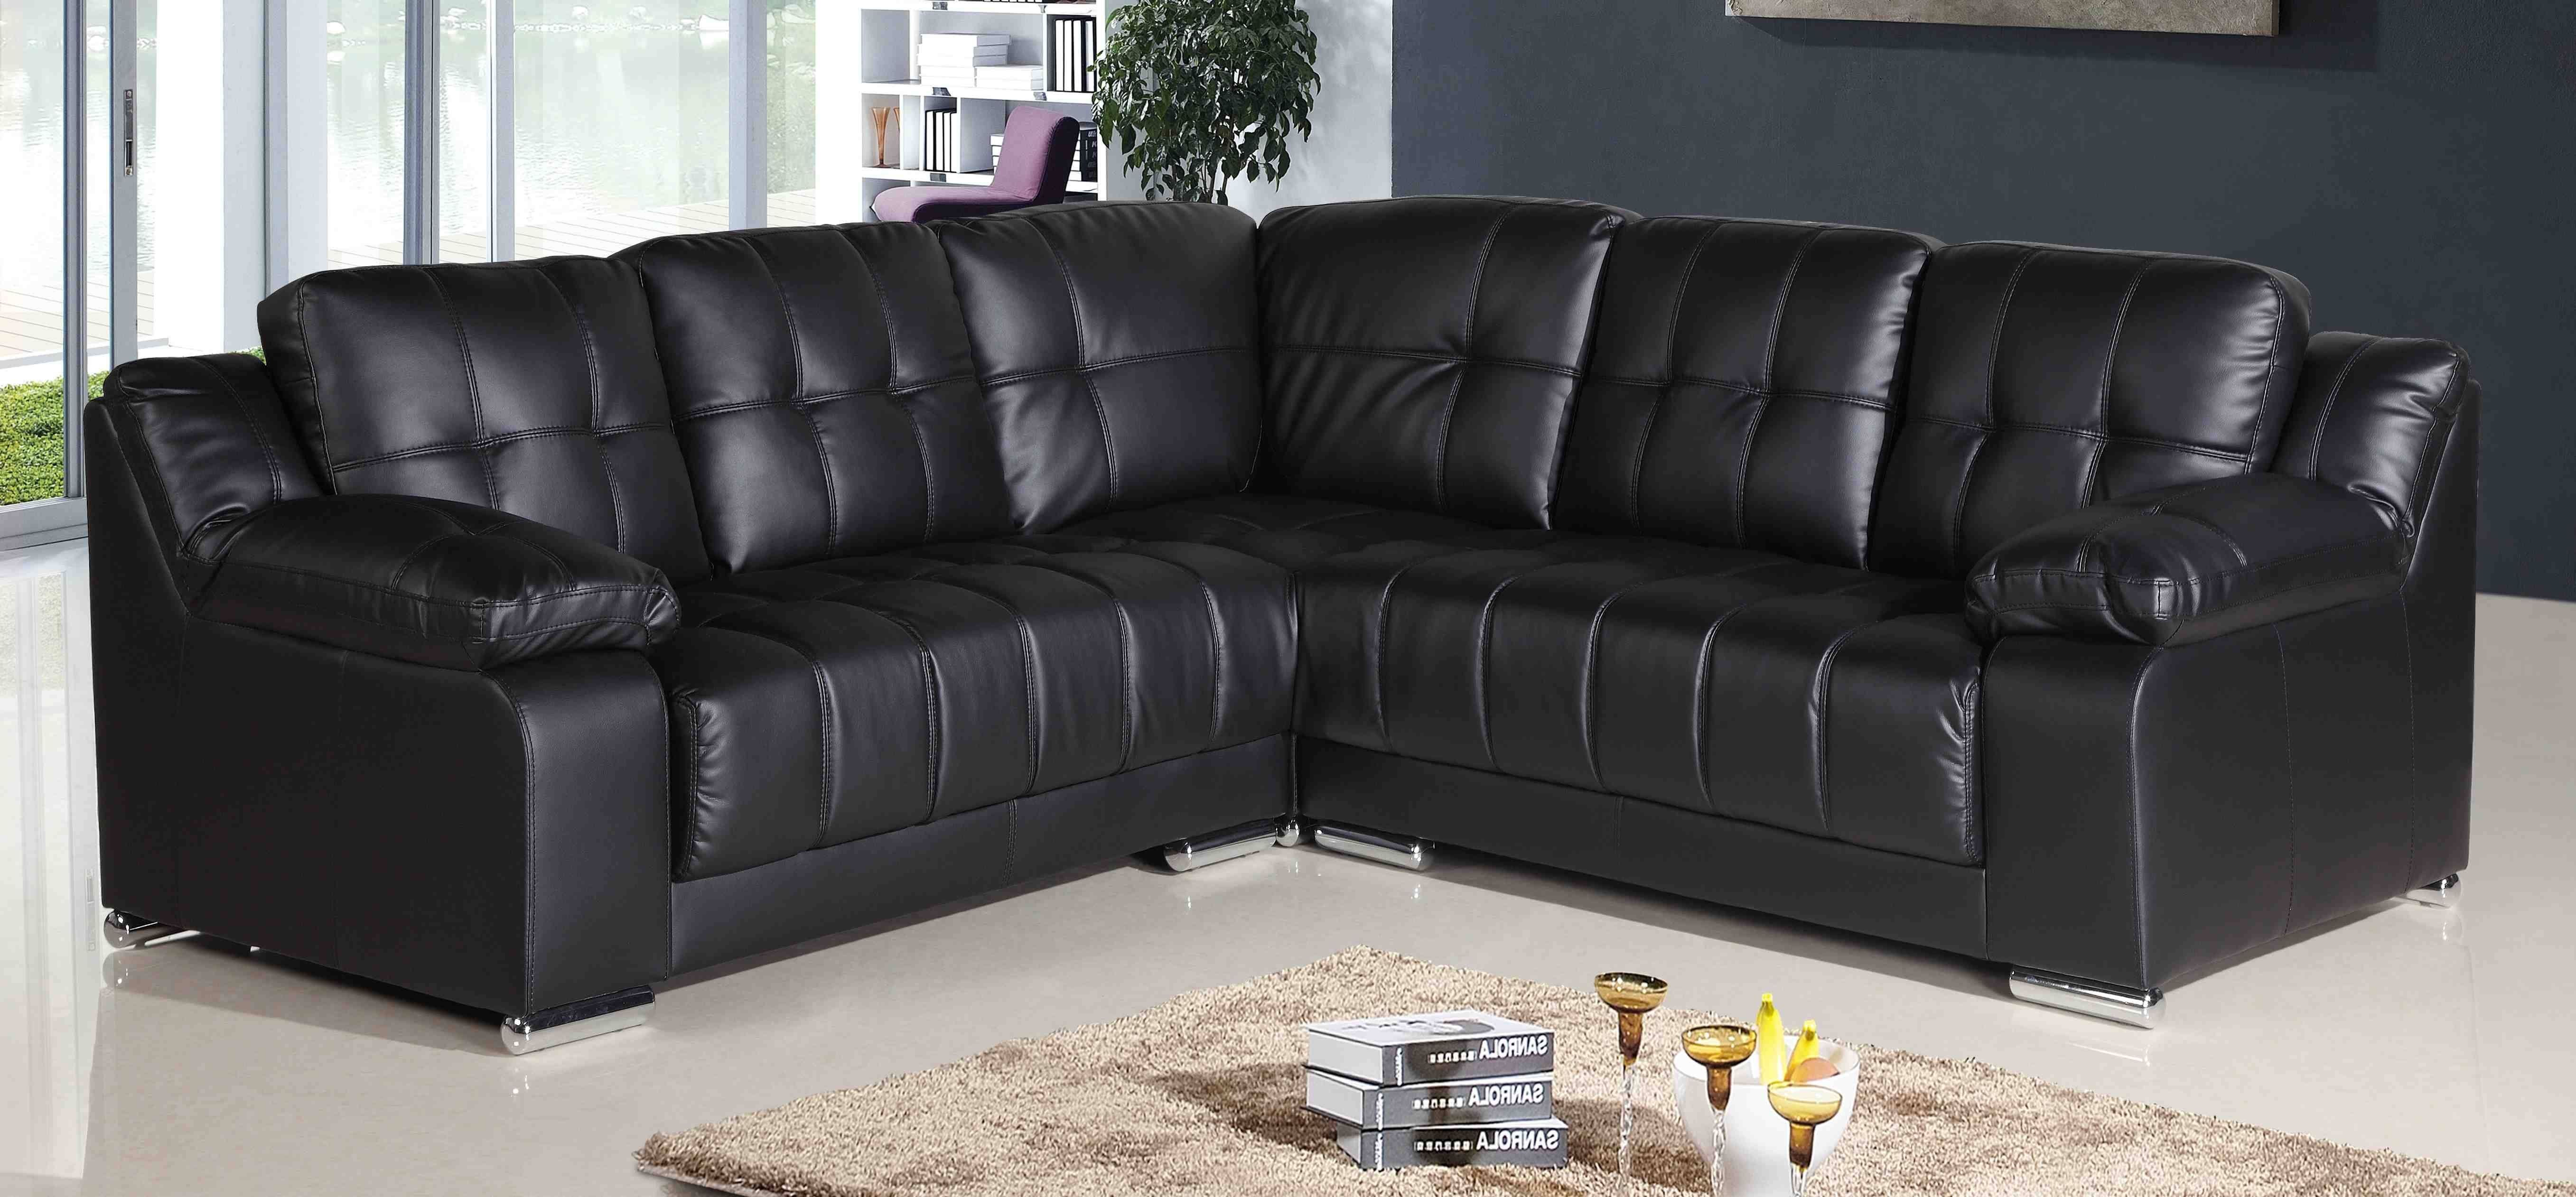 cheap leather corner sofa bed